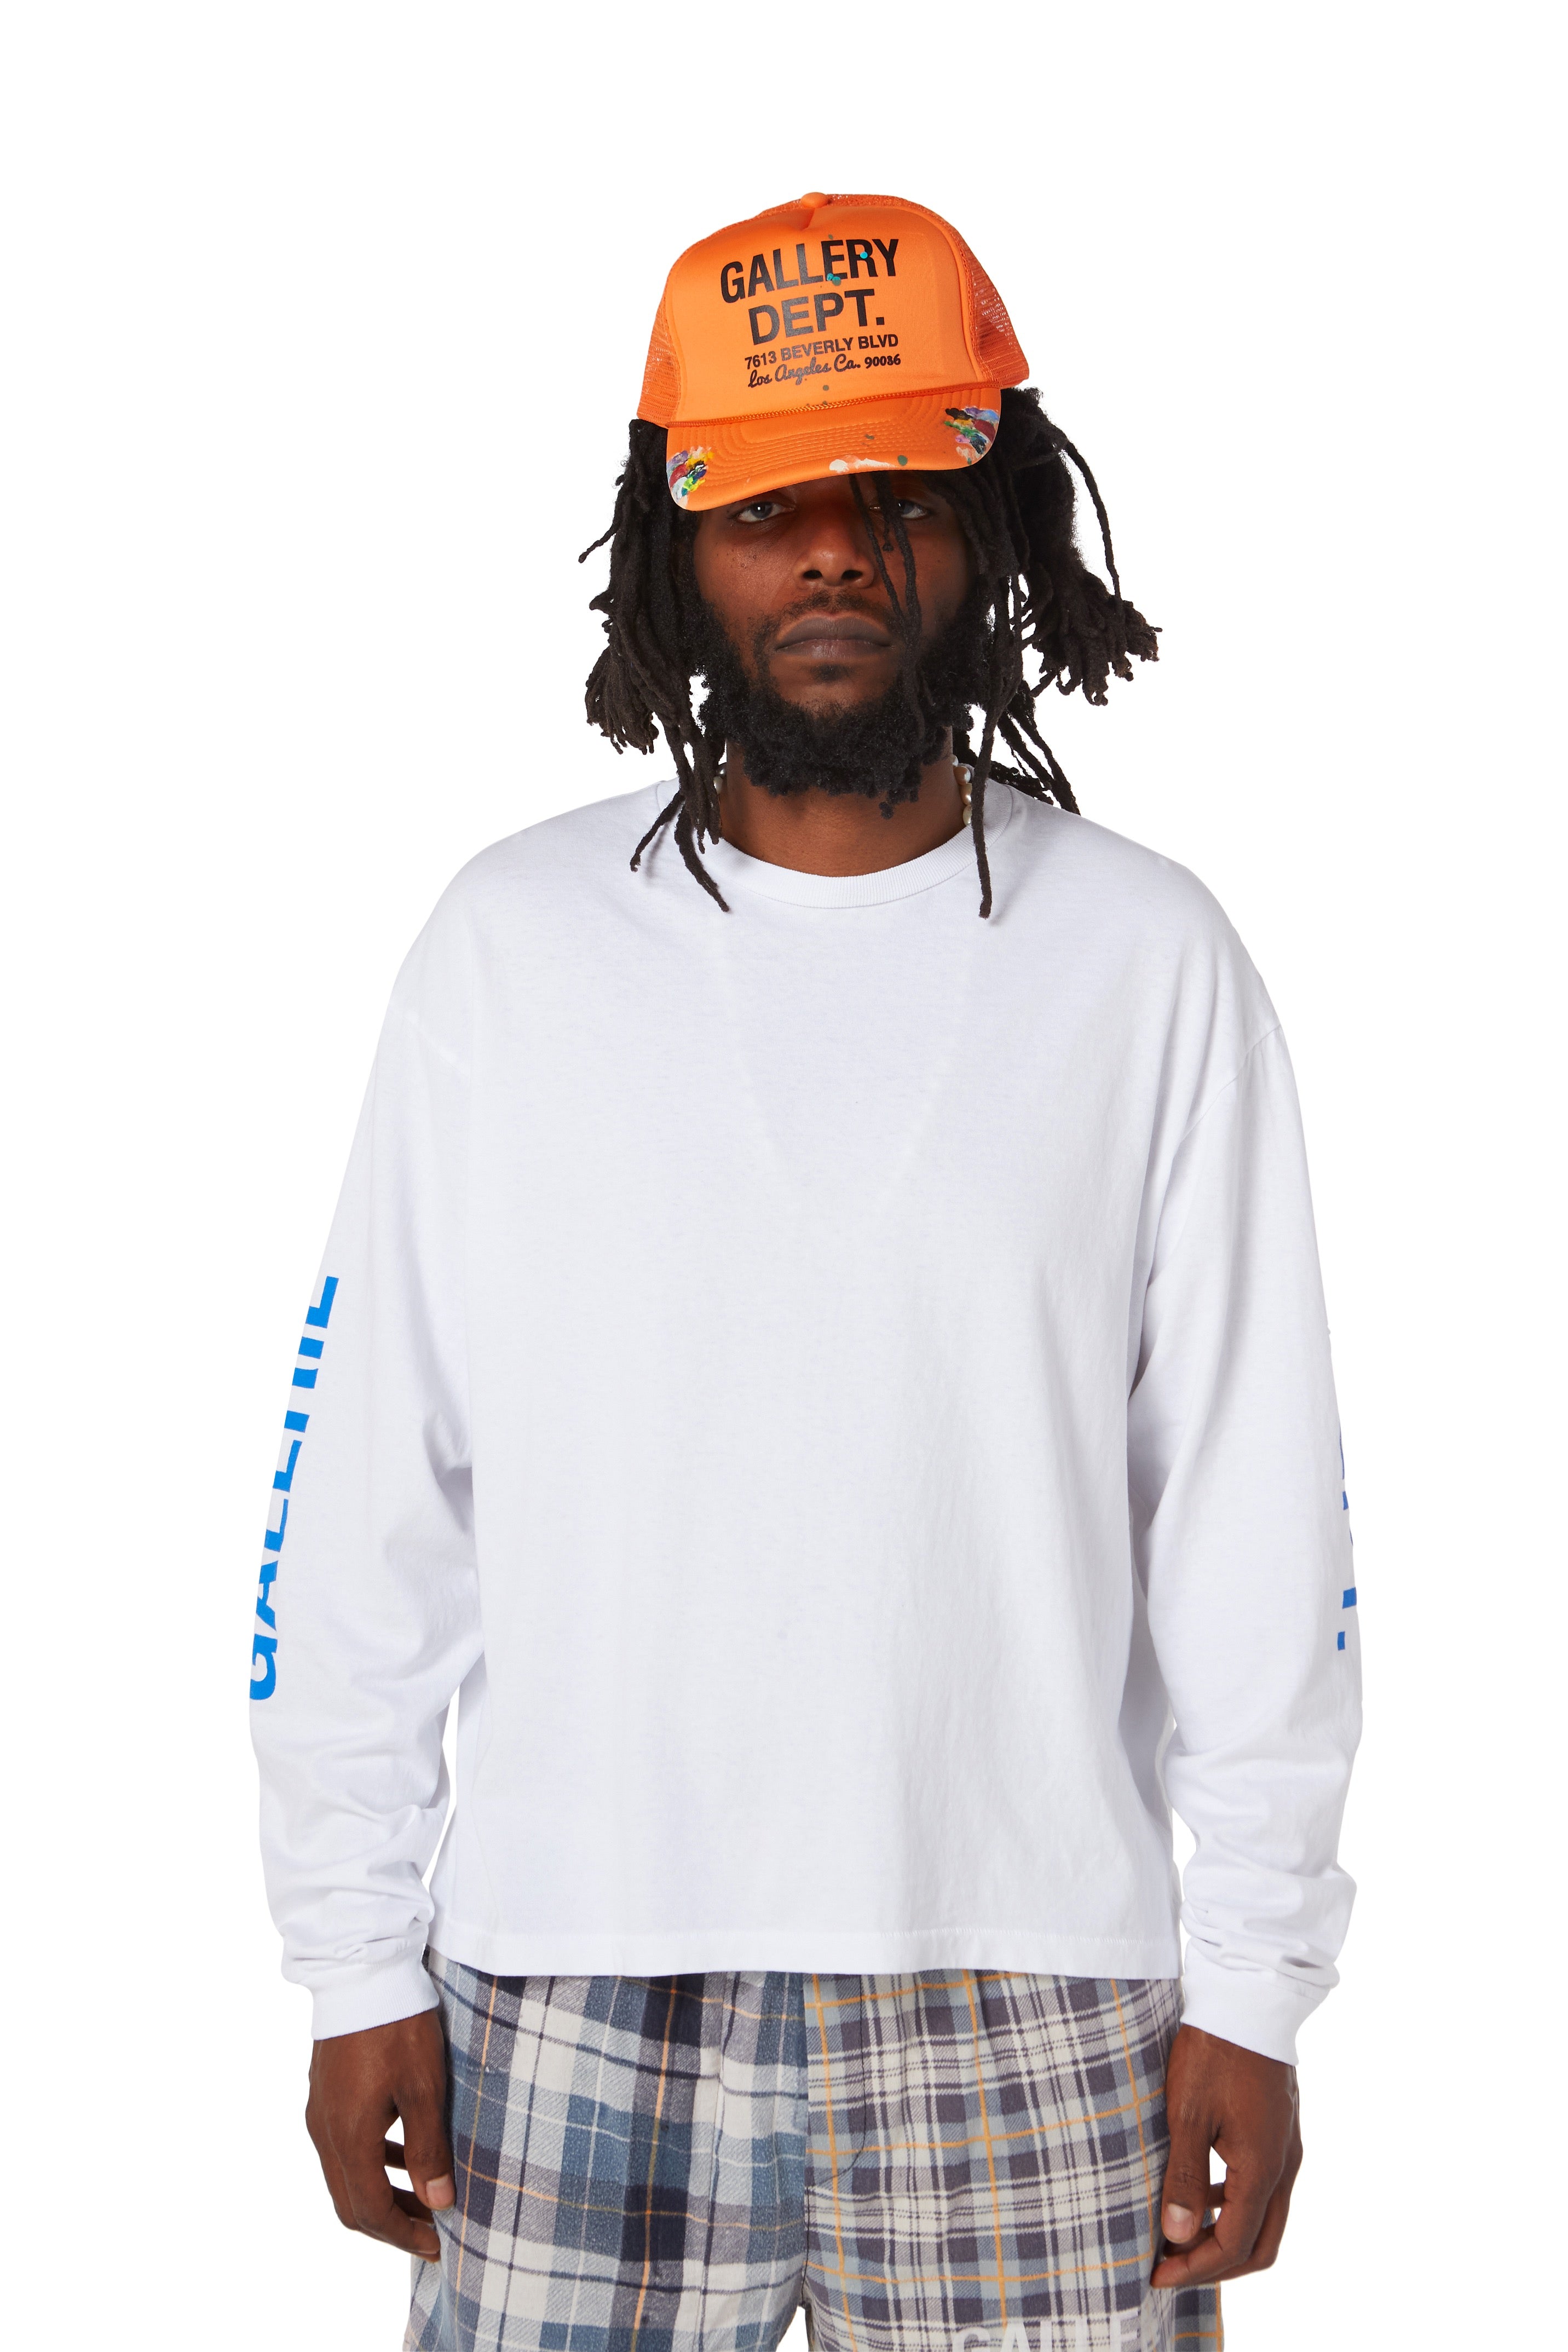 LONG COLLECTOR Dept – SLEEVE online T-SHIRT FRENCH - WHITE Gallery